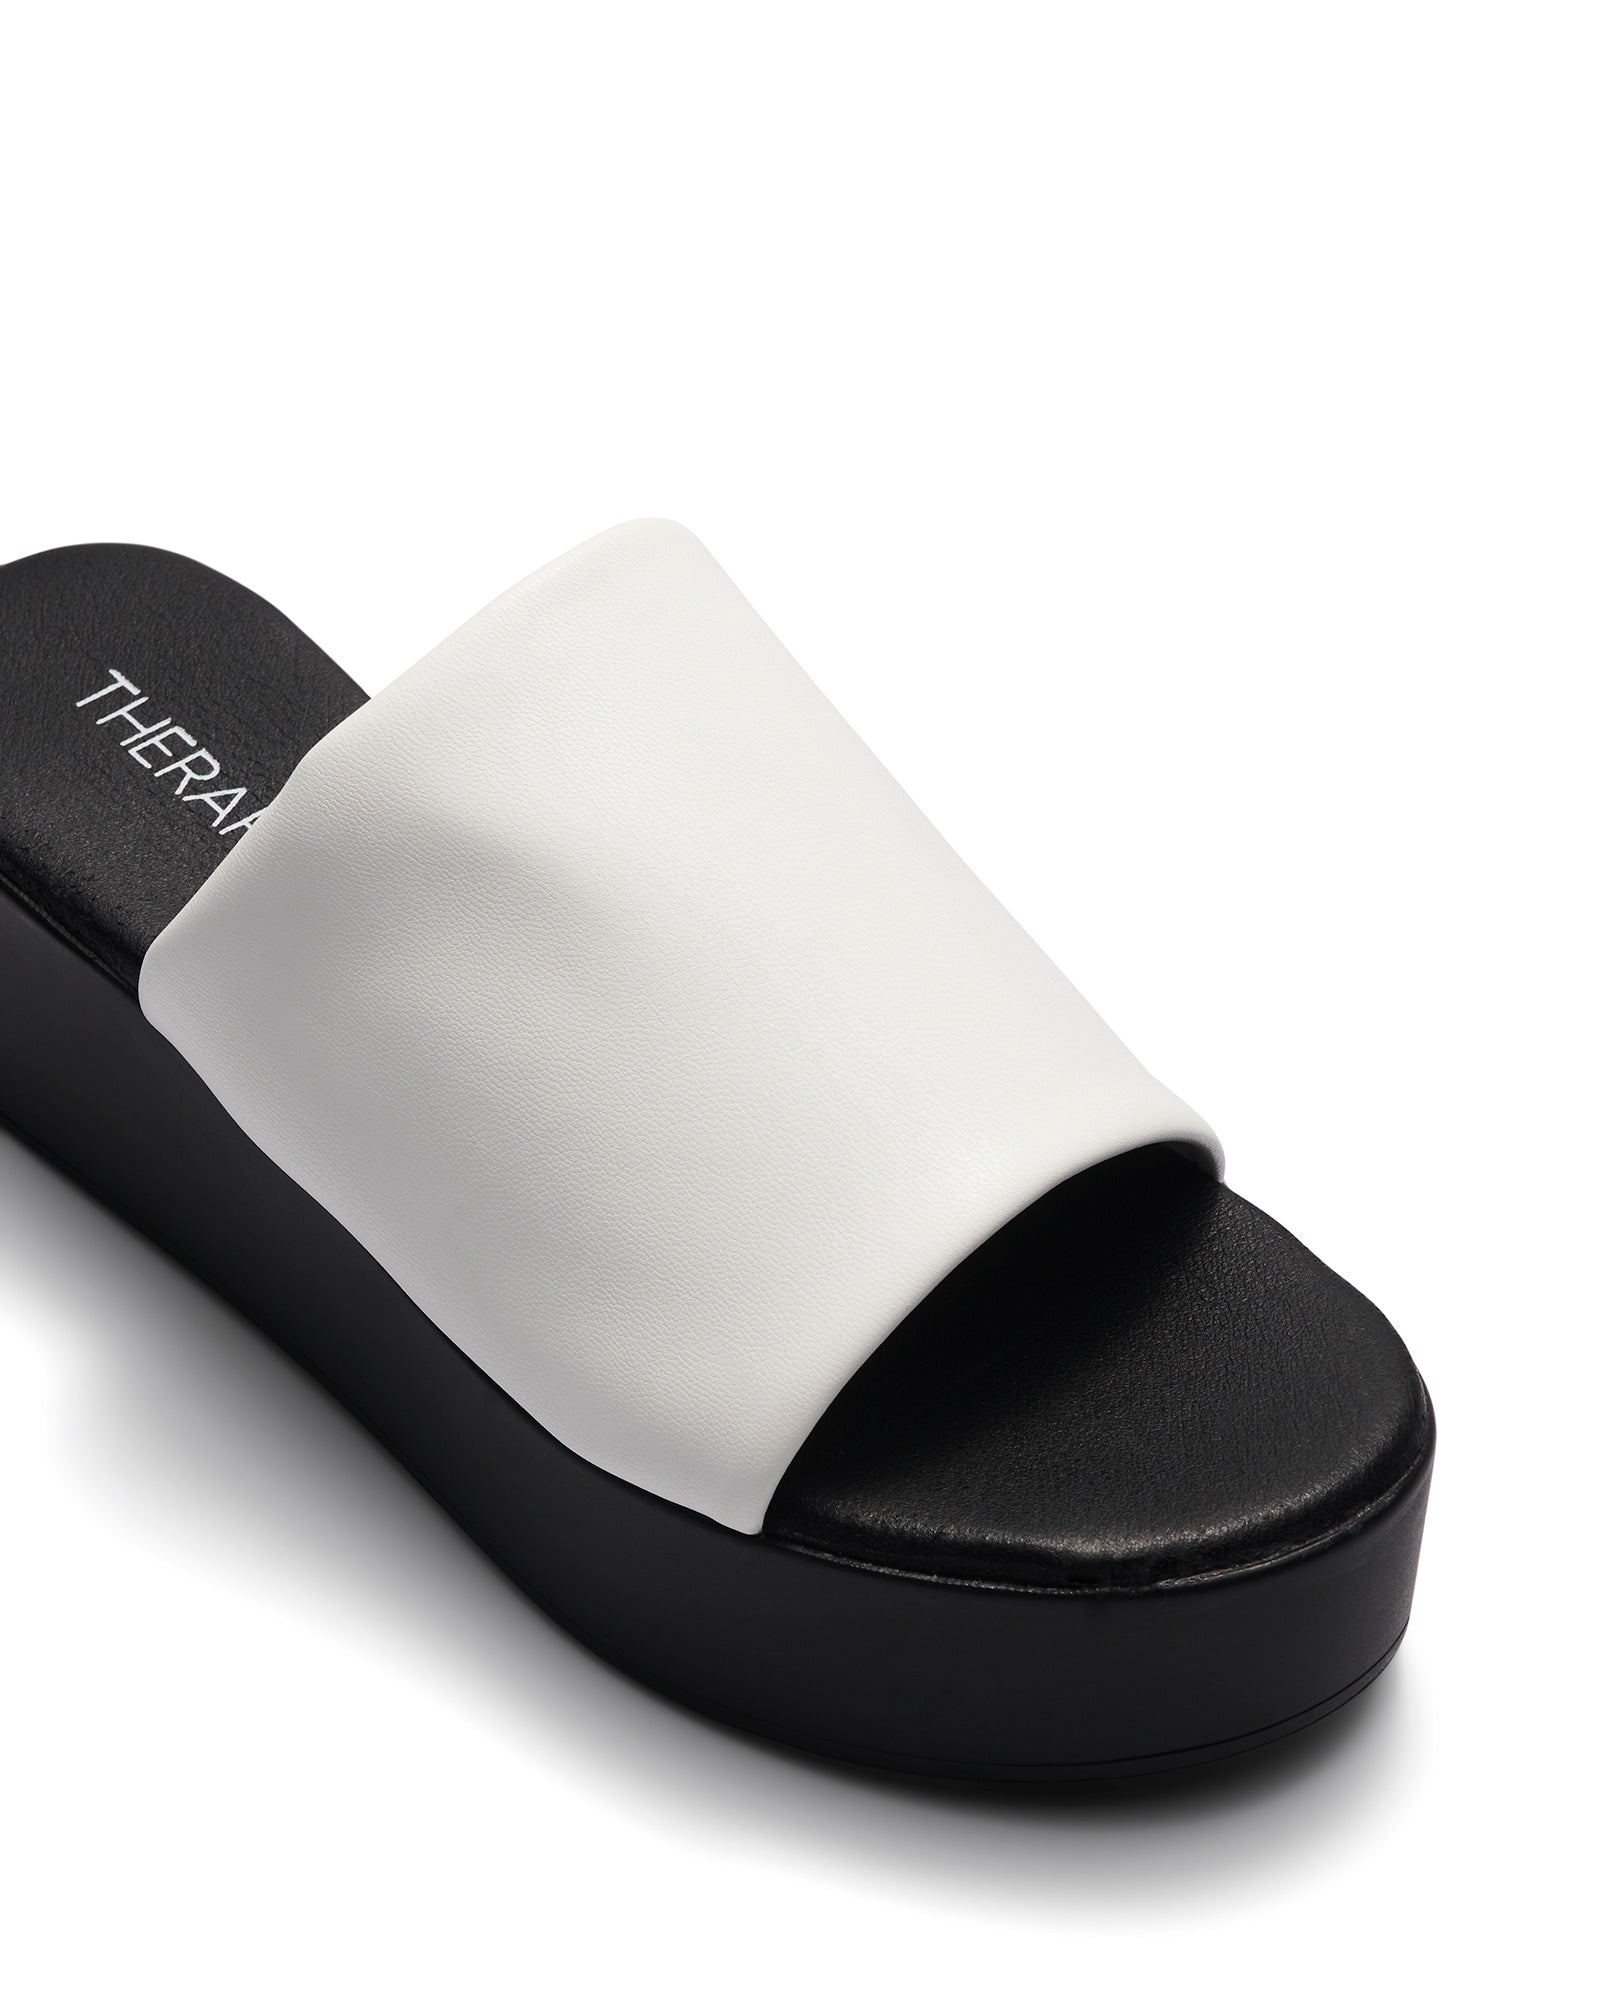 Therapy Shoes Livid White | Women's Slides | Platforms | Sandals 